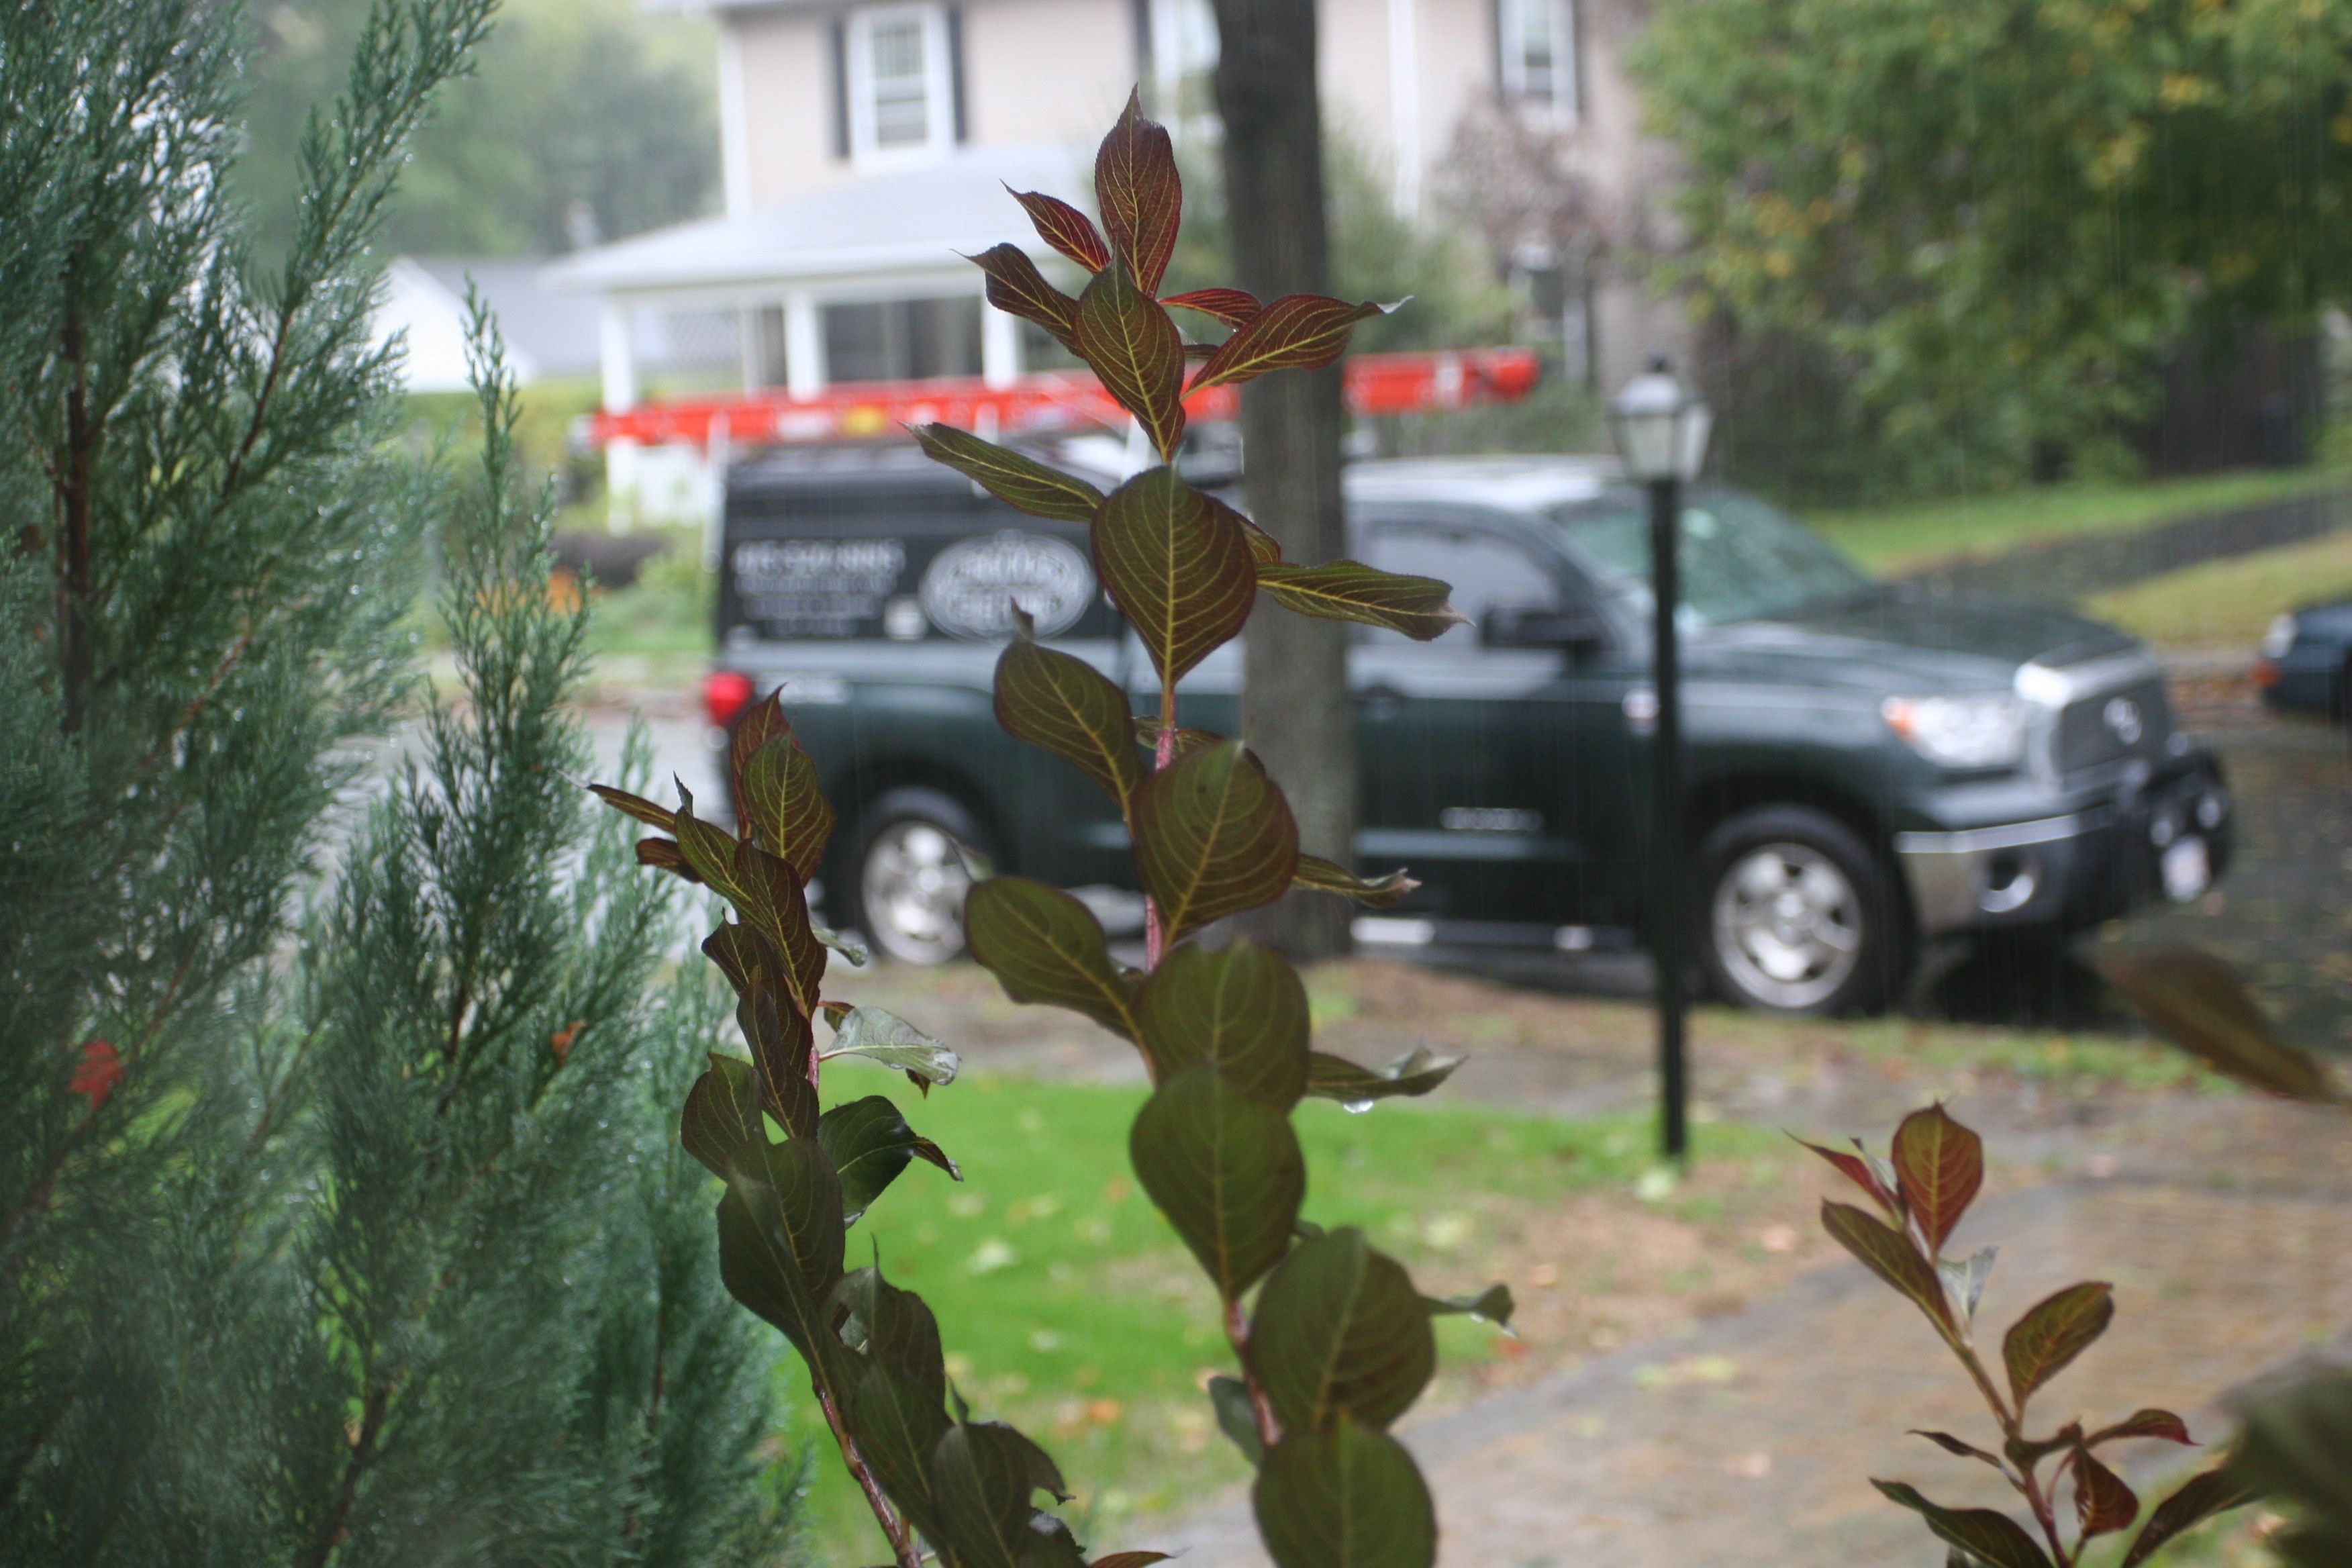 Beauty shot: Osgood Electric truck behind the rain-soaked shrubbery.